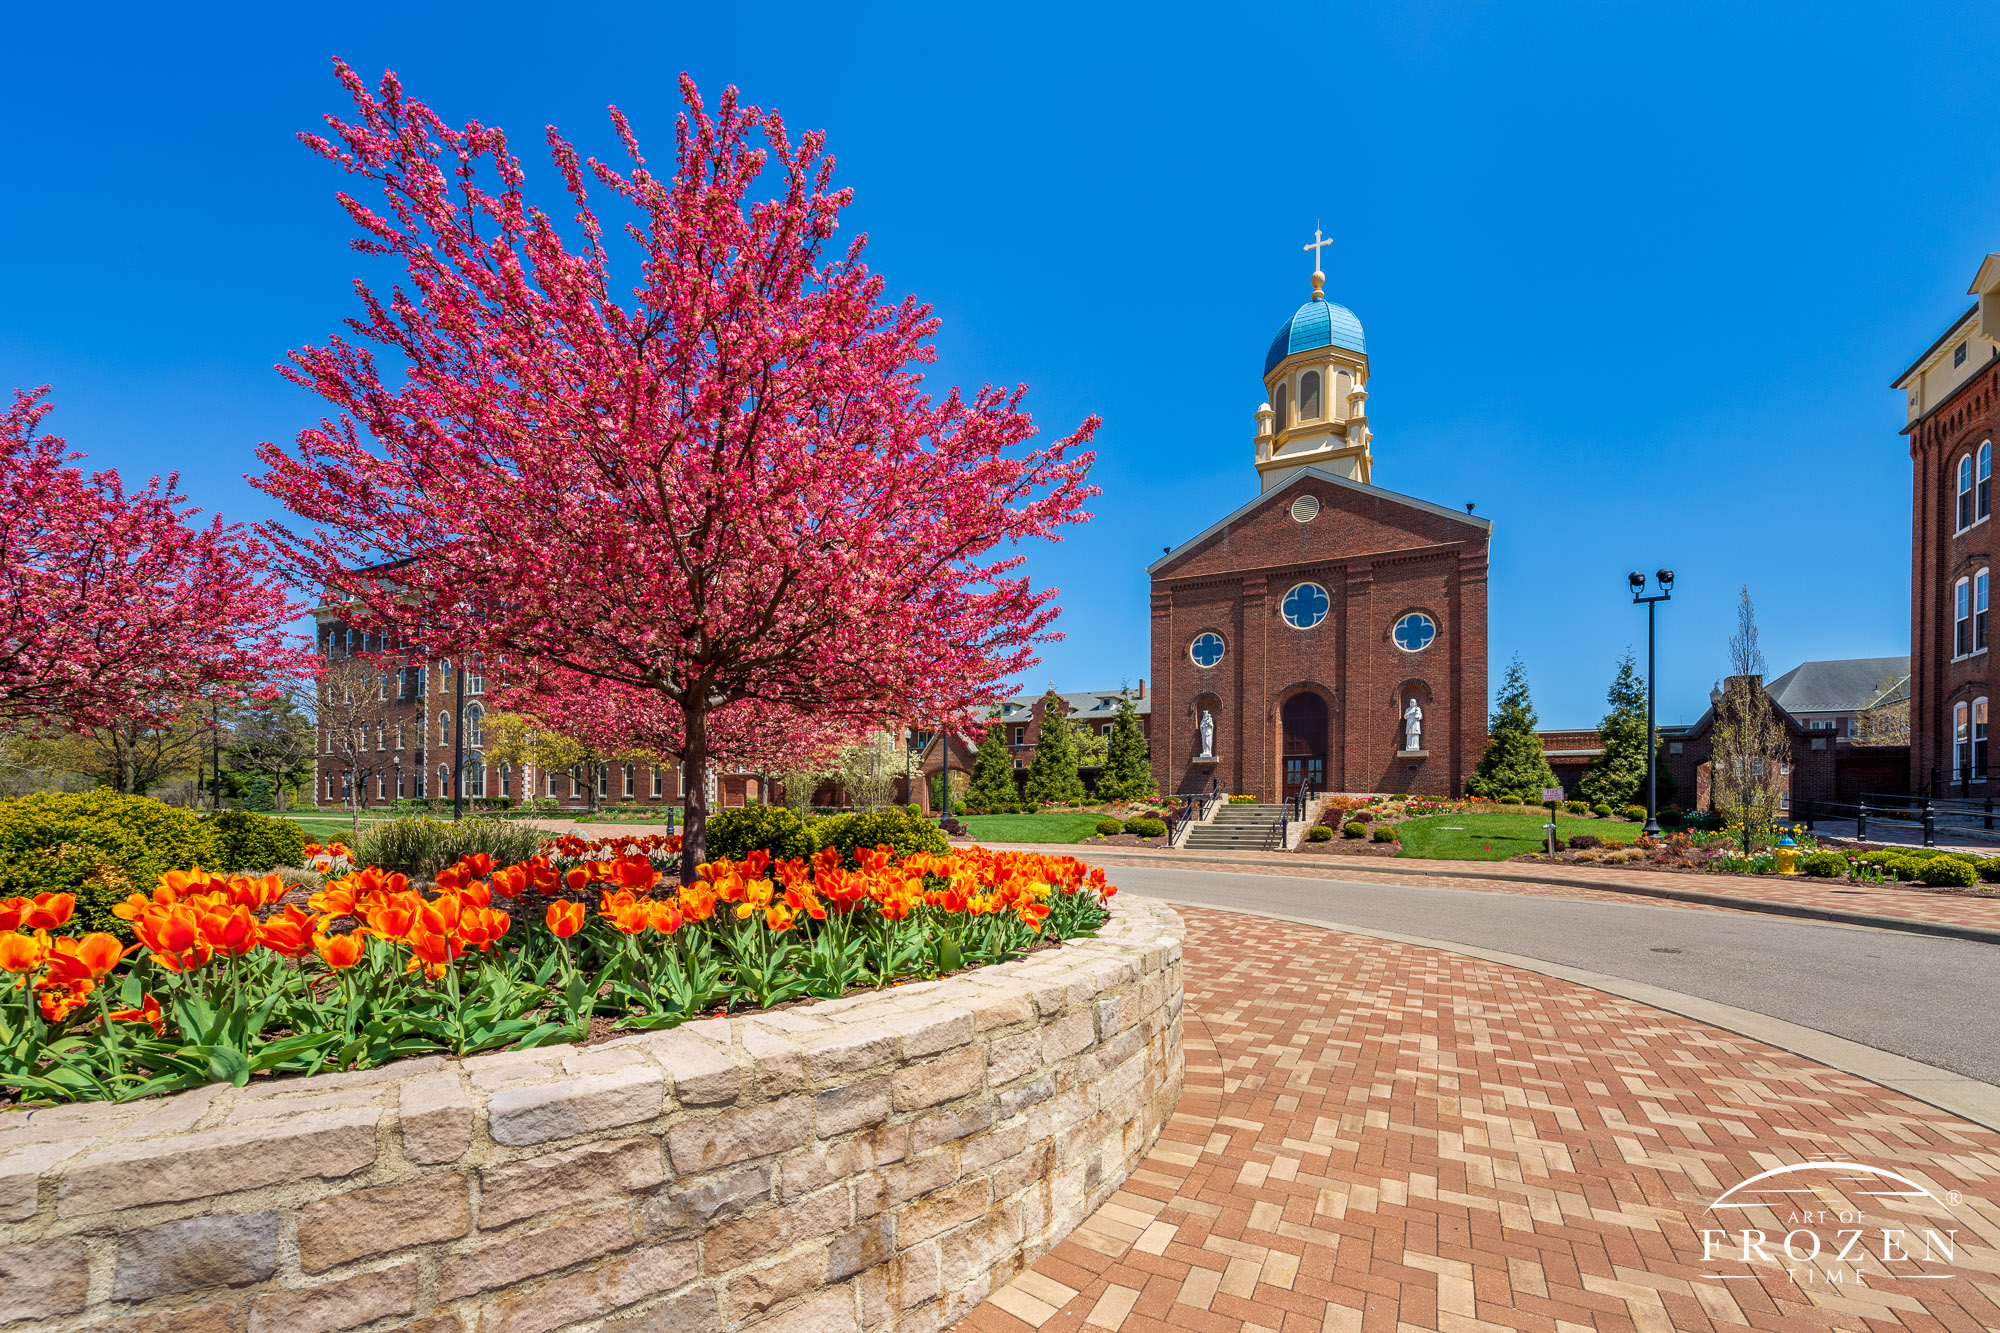 Colorful view of UD’s Chapel of Immaculate Conception with surrounding landscape in full spring bloom under blue skies